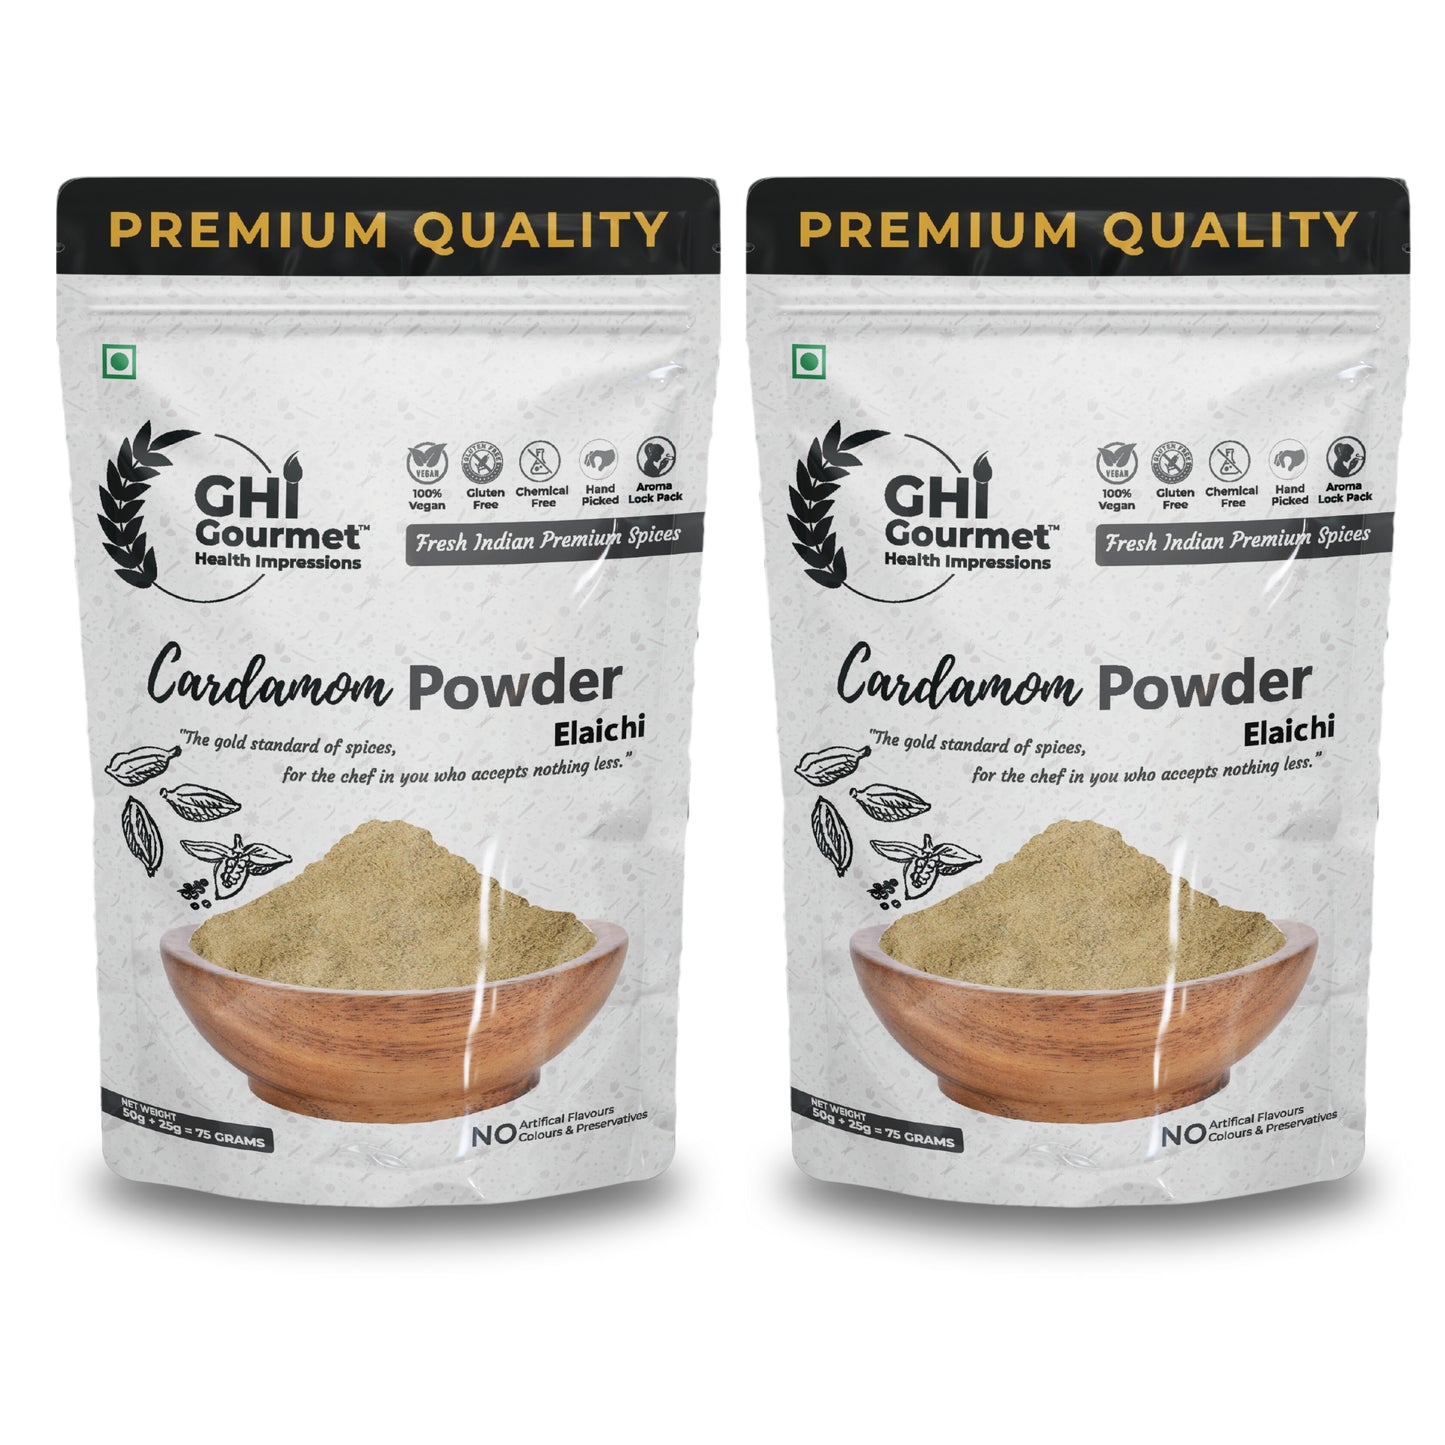 Superior Grade Cardamom Powder  75g (Pack of 1) and 150g (Pack of 2)